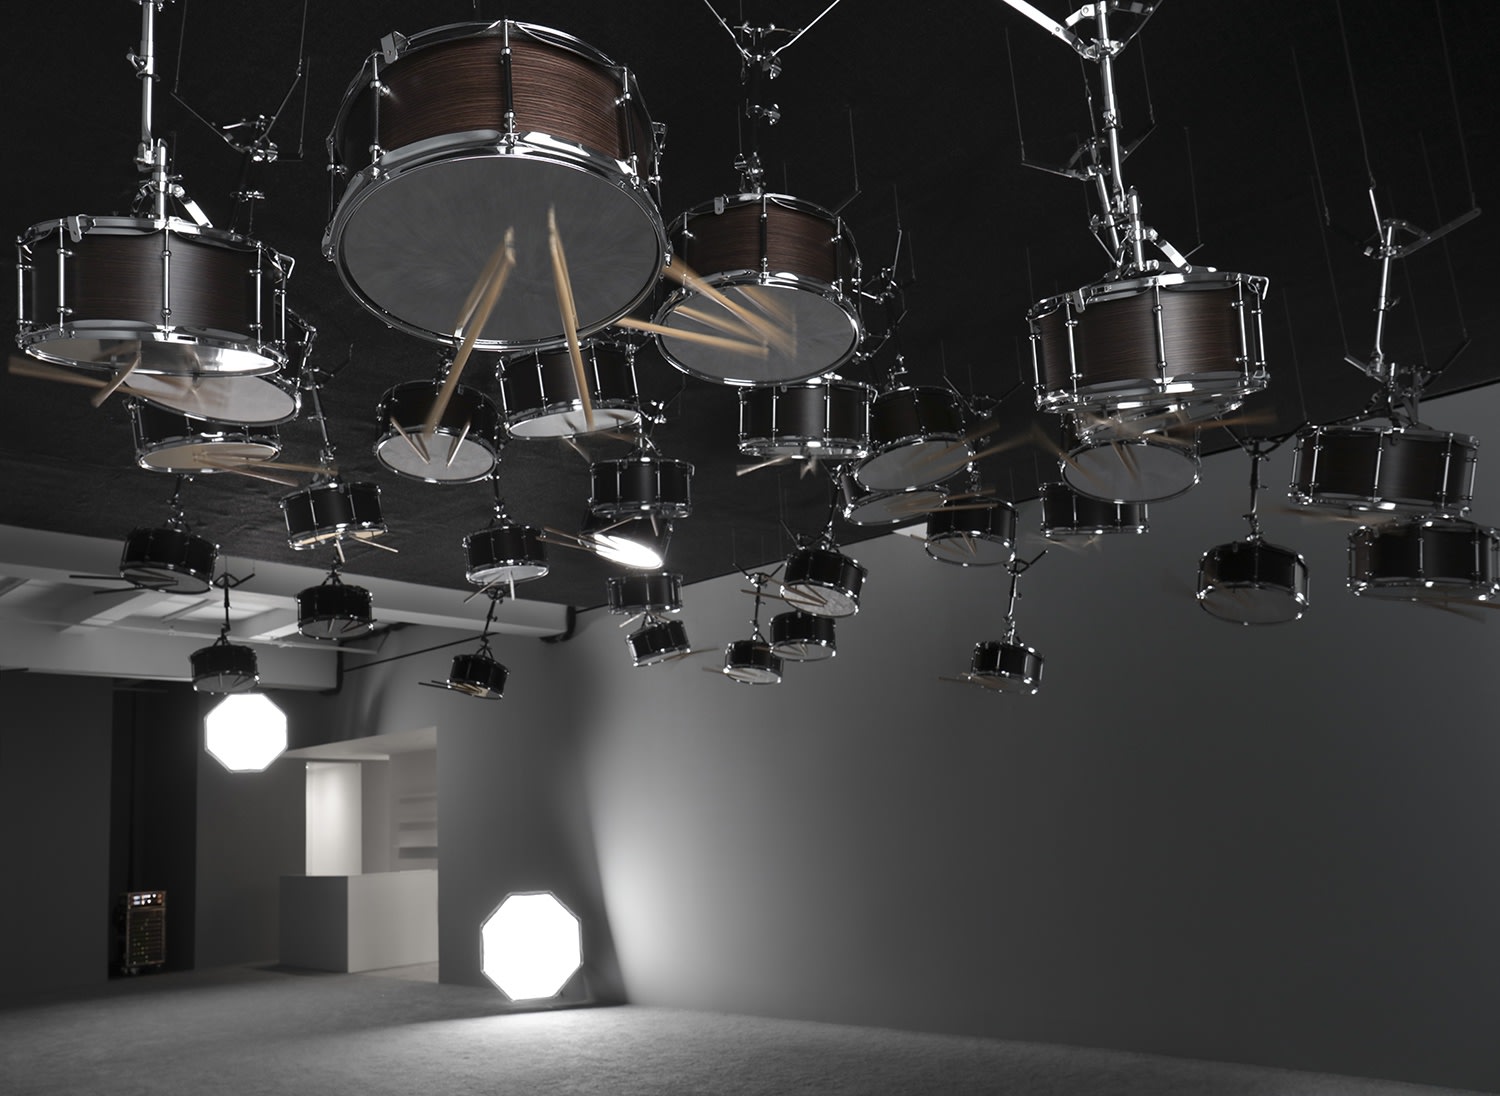 Snare drums suspended upside down from the ceiling in a grey room. 